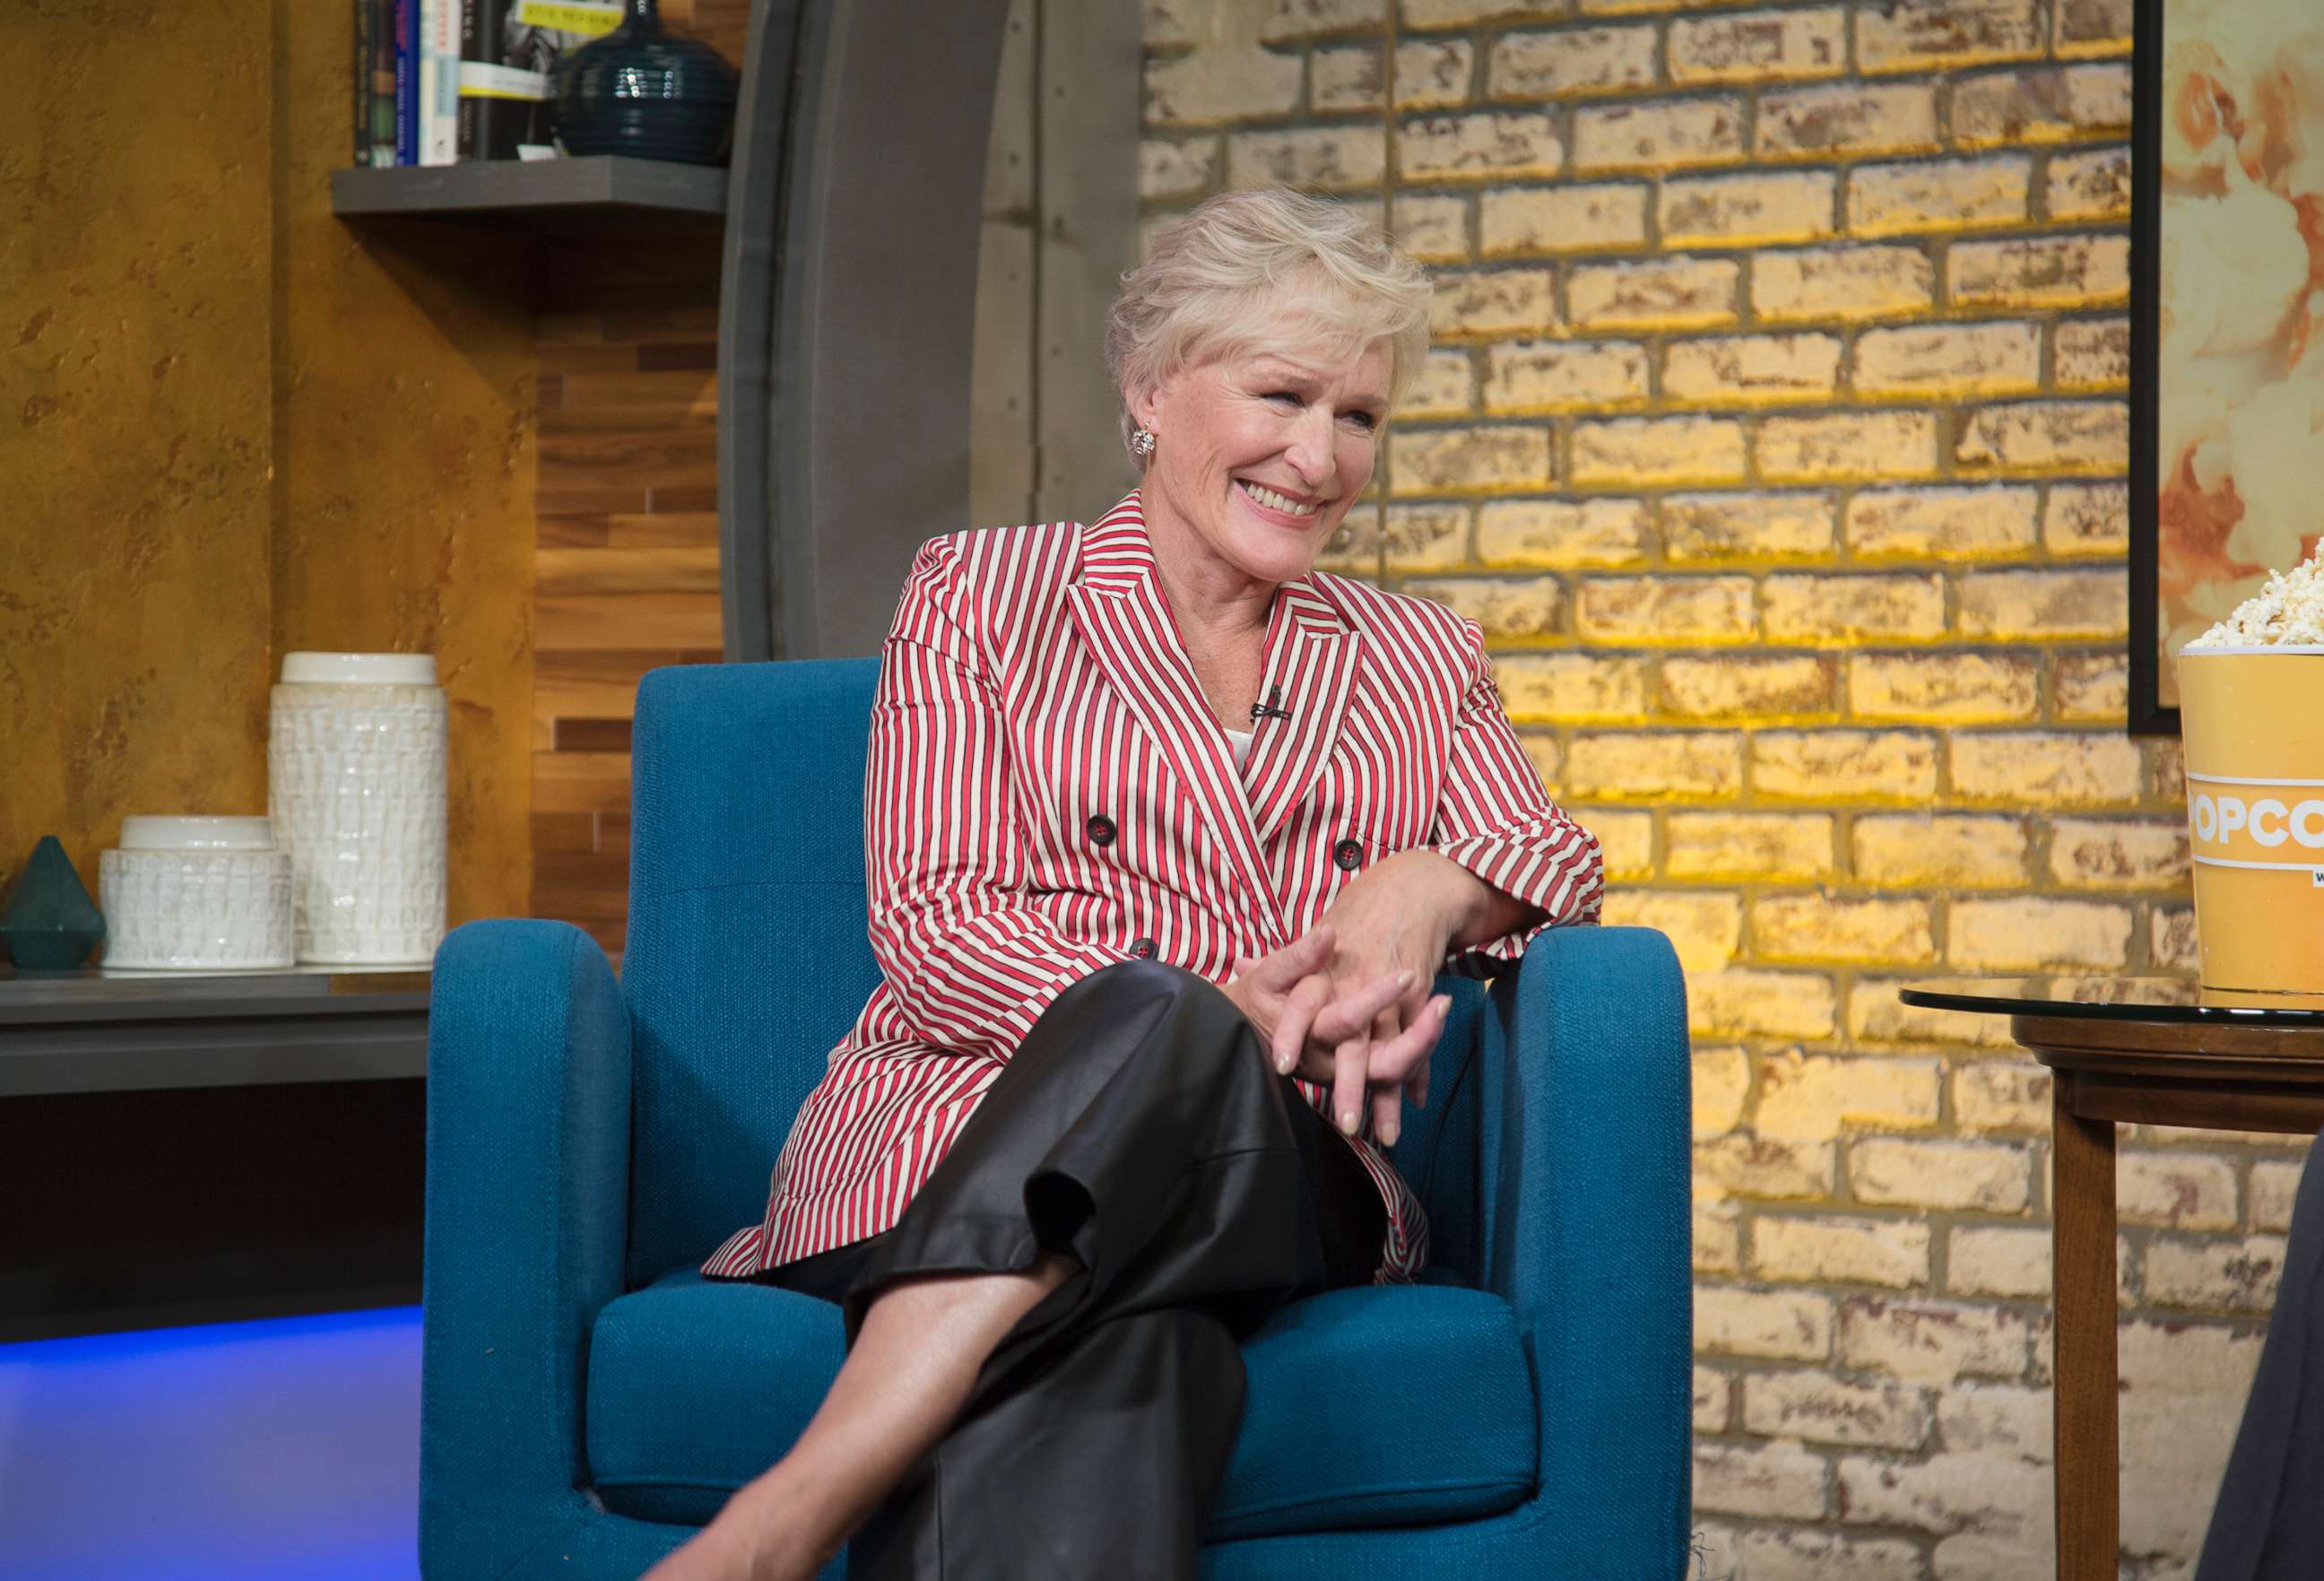 PHOTO: Glenn Close appears on "Popcorn with Peter Travers" at ABC News studios, Aug. 6, 2018, in New York City.